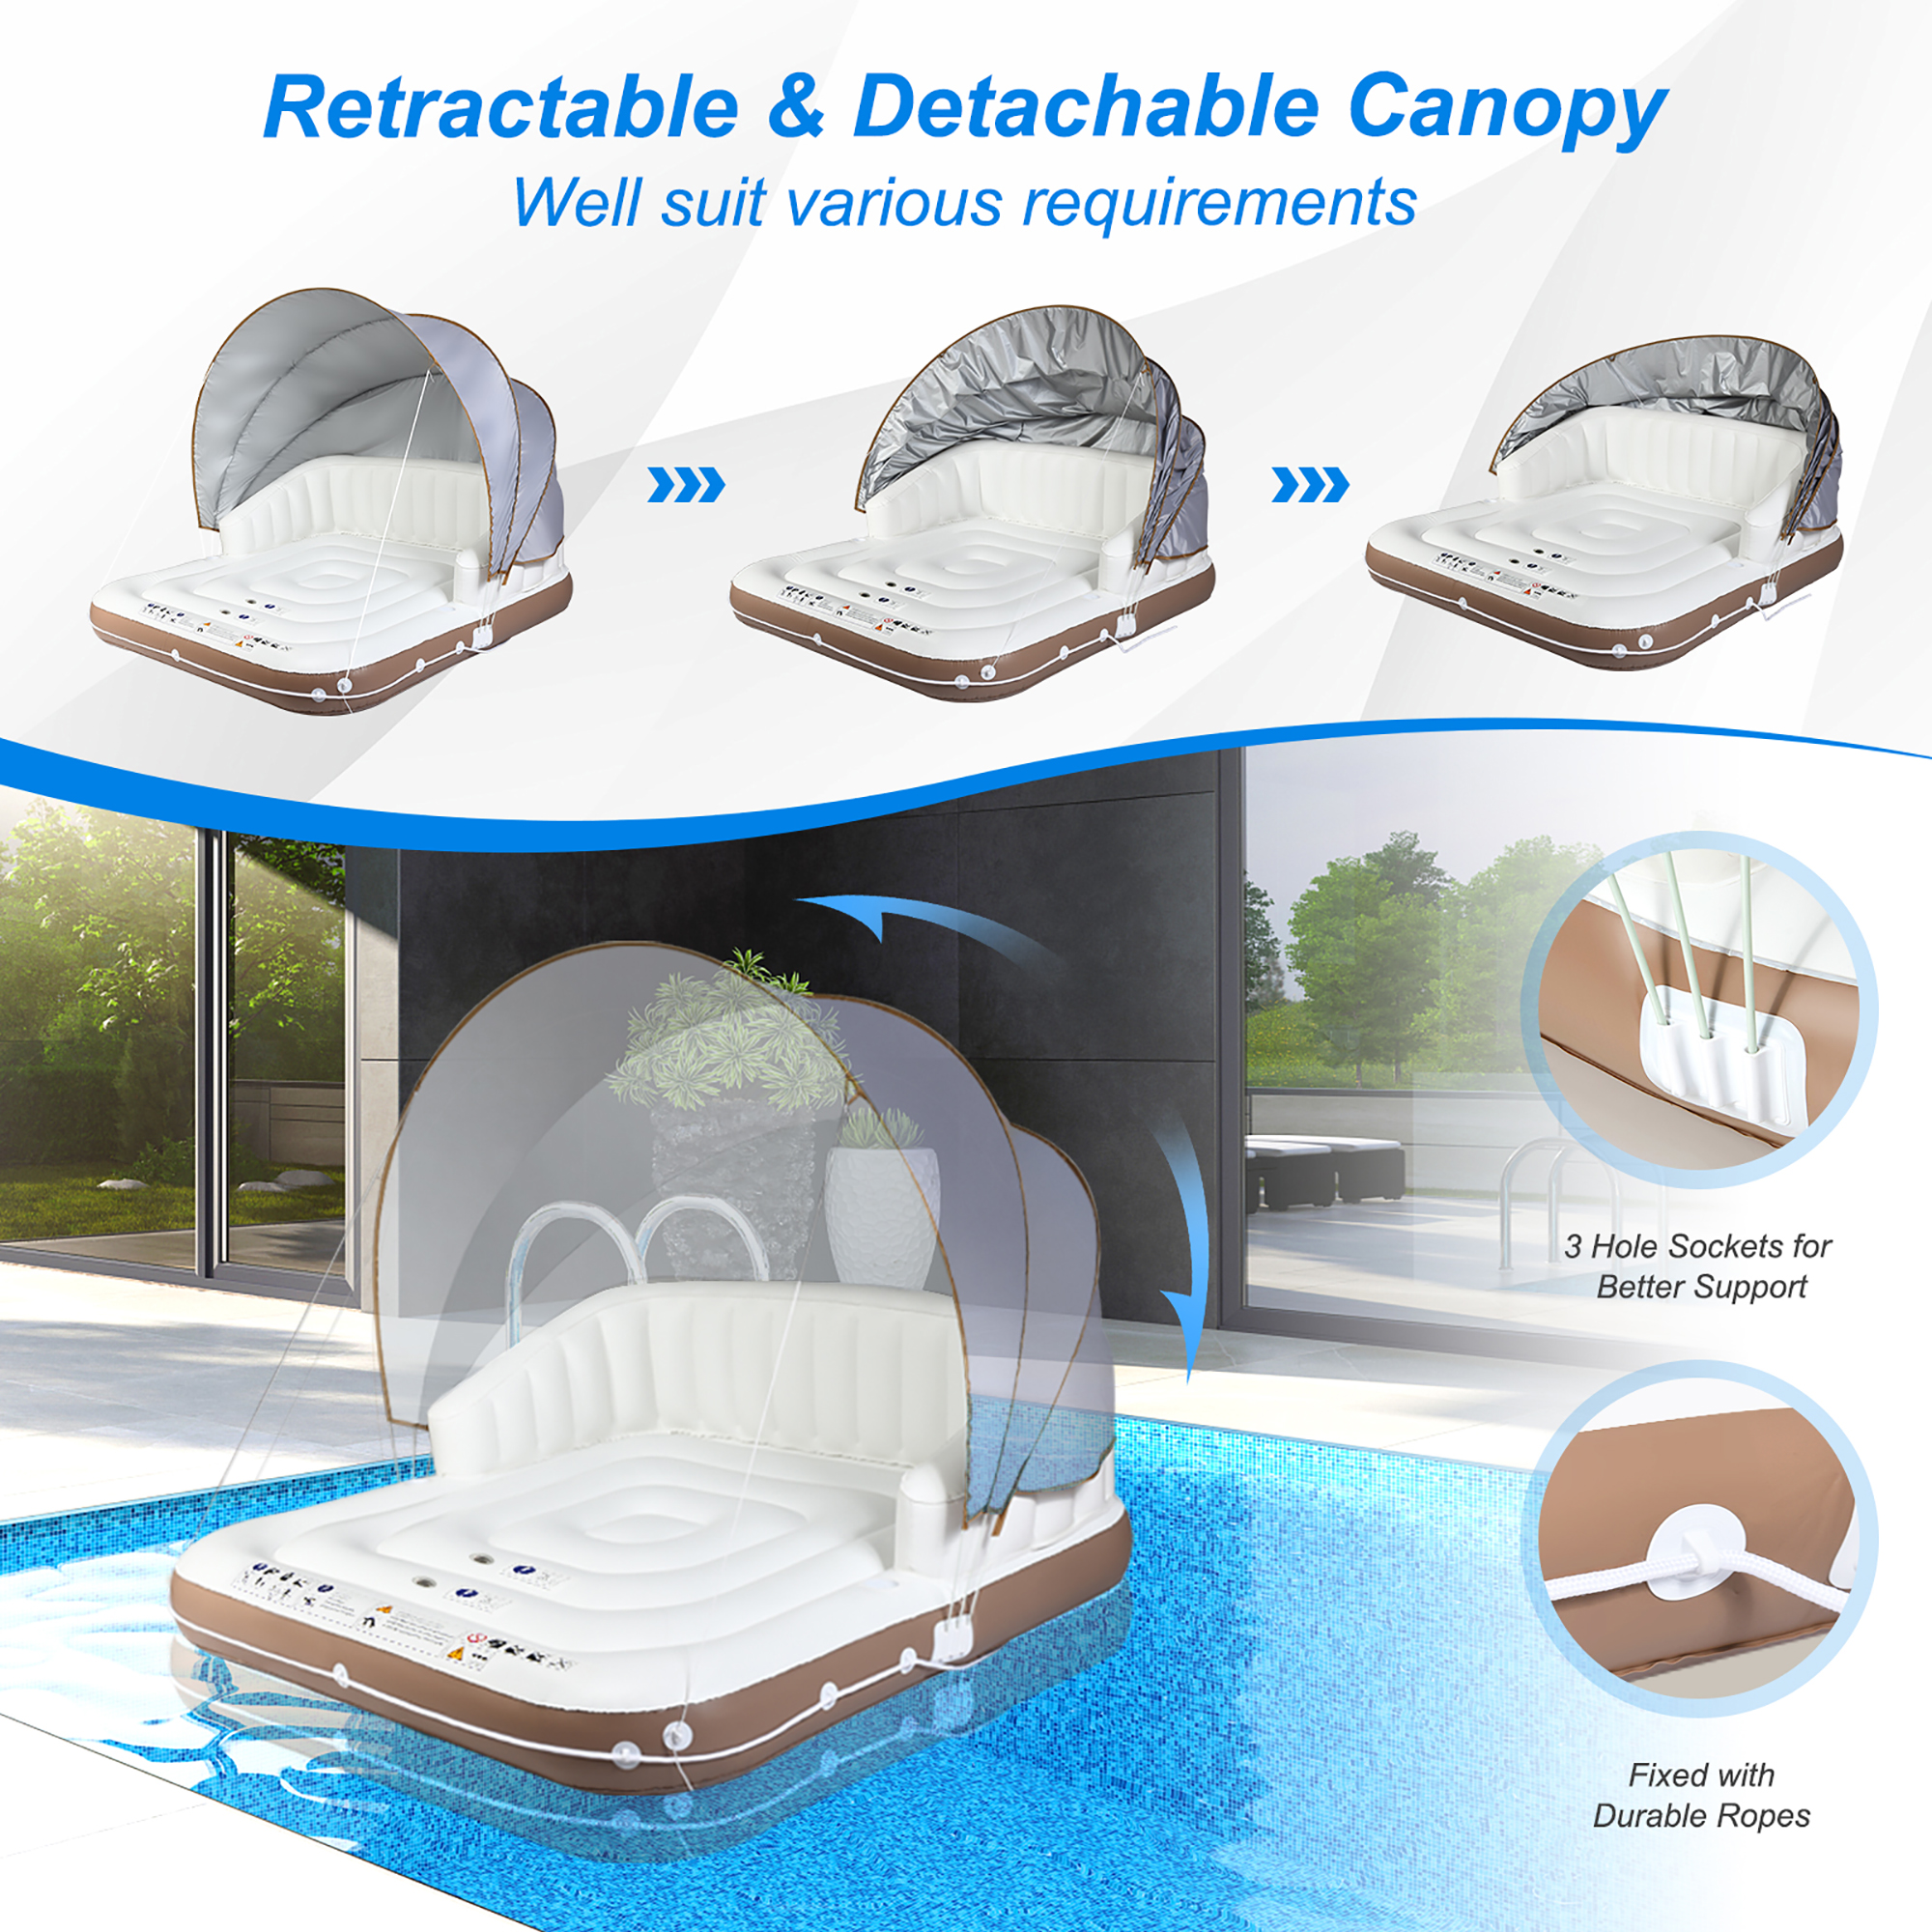 Costway Floating Island Inflatable Swimming Pool Float Lounge Raft with Canopy SPF50+ Retractable Detachable Sunshade with Two Cup Holders White - image 5 of 10